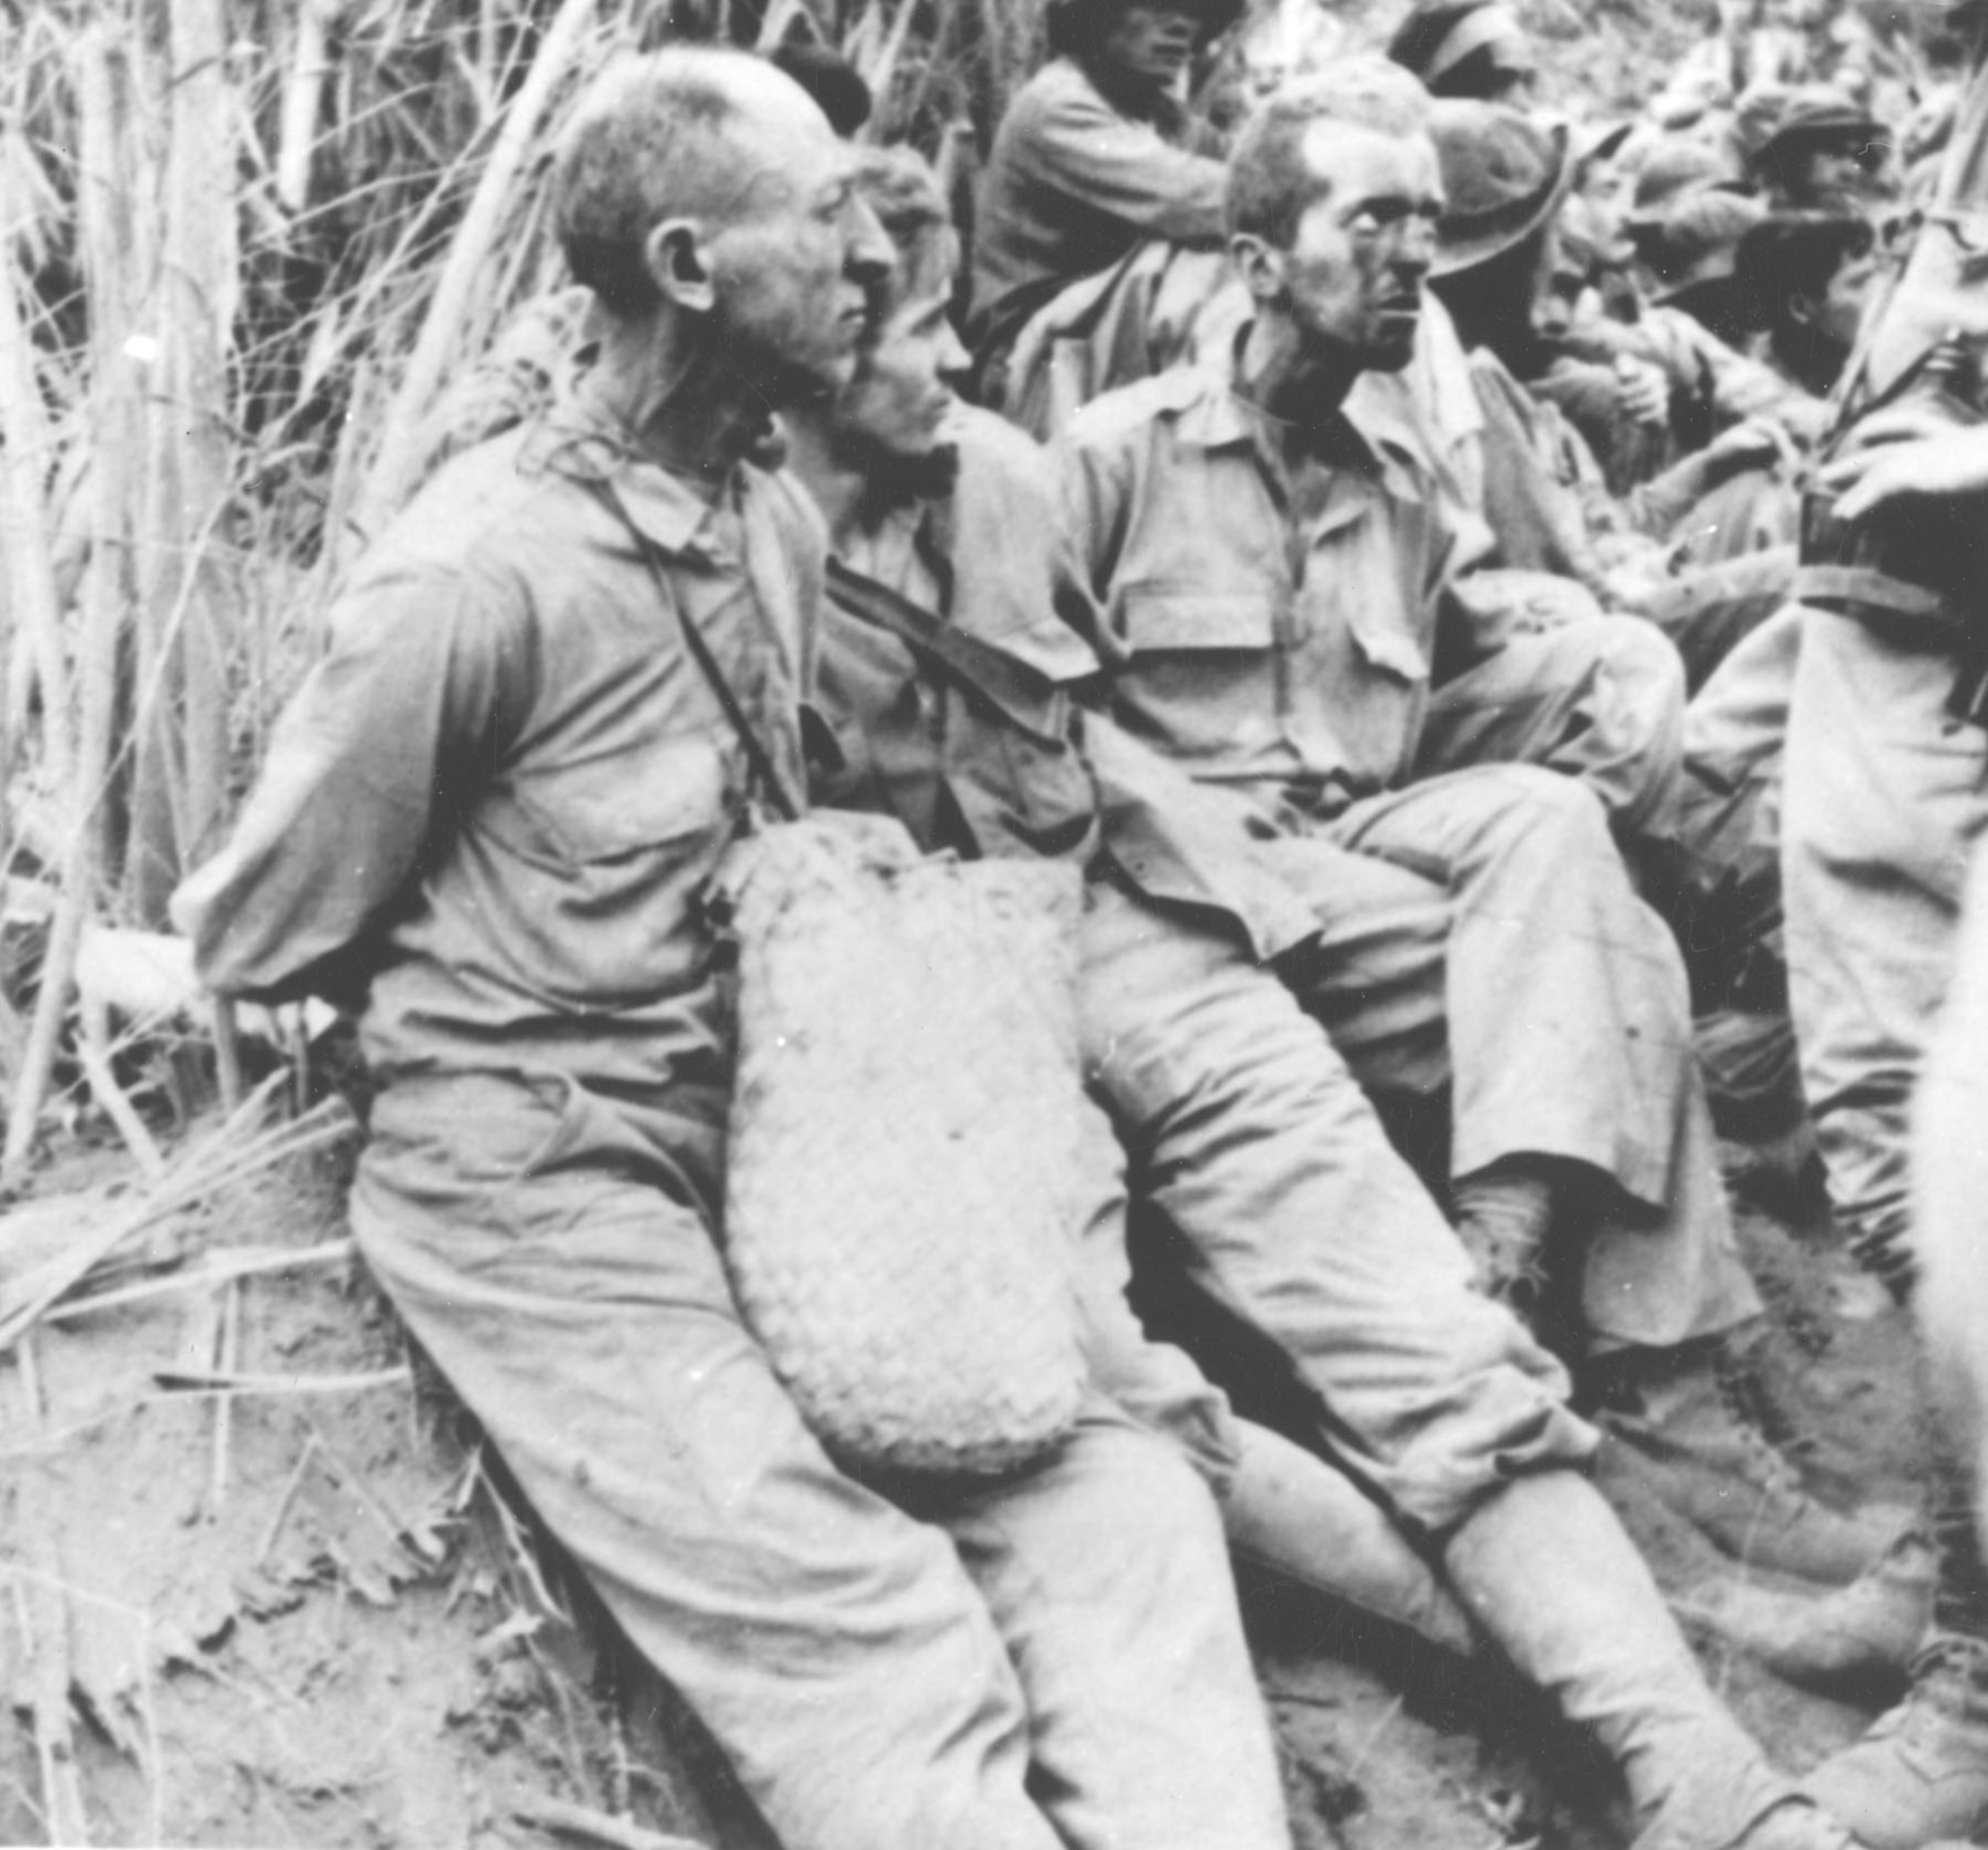 American POWs with their hands tied behind their backs. The effects of hunger, sickness and fatigue are evident. (U.S. Air Force photo)